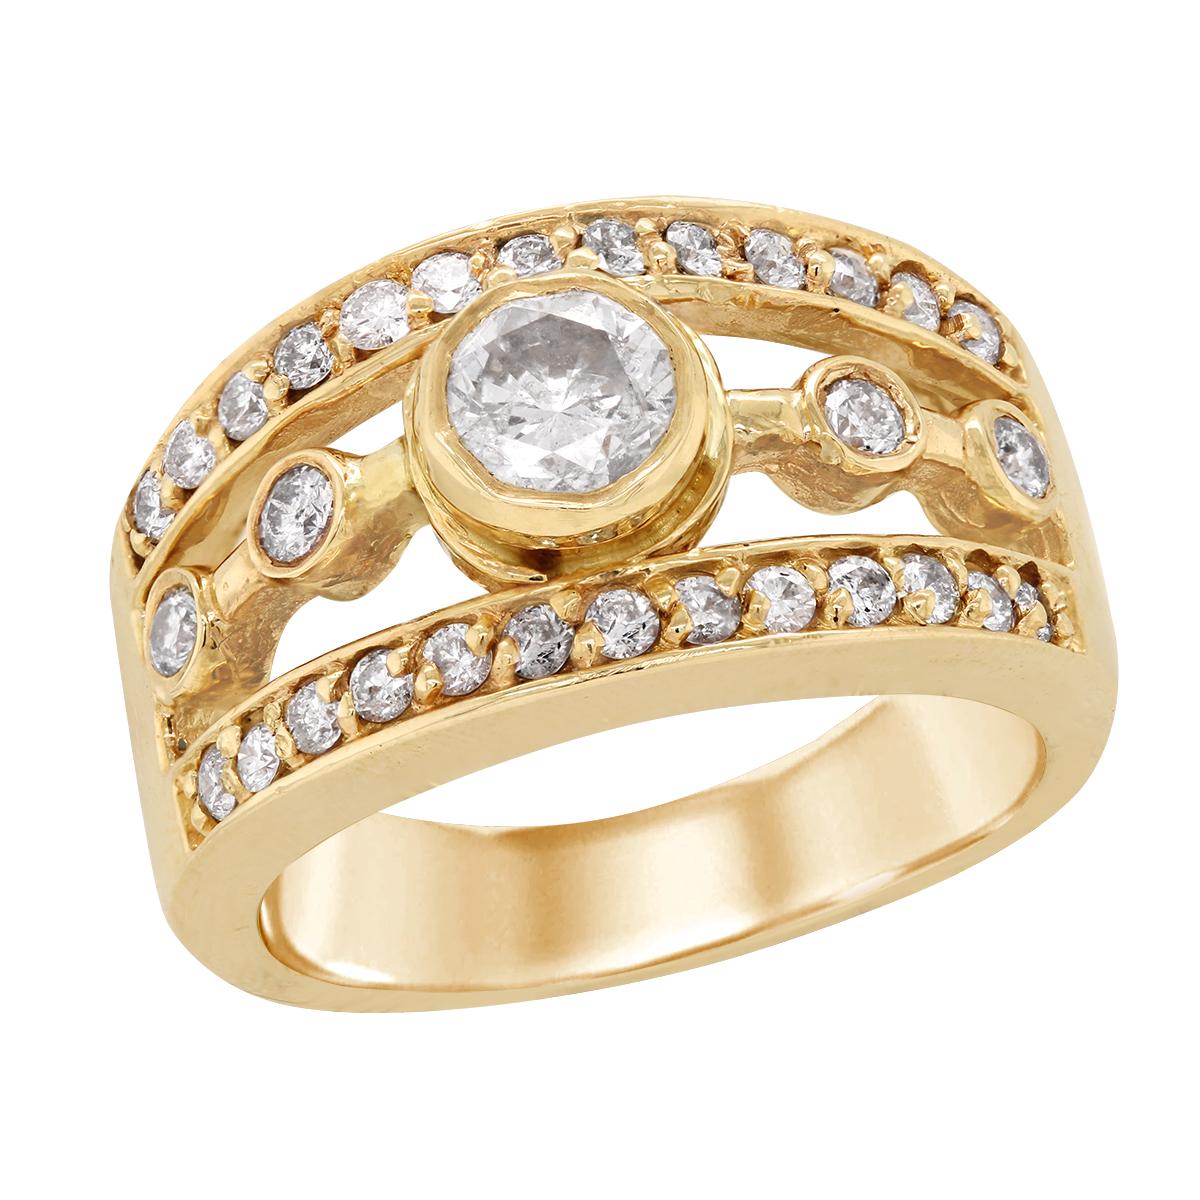 YELLOW GOLD FASHION RING WITH SPLIT SHANK AND DIAMONDS, 1 5/8 CT 